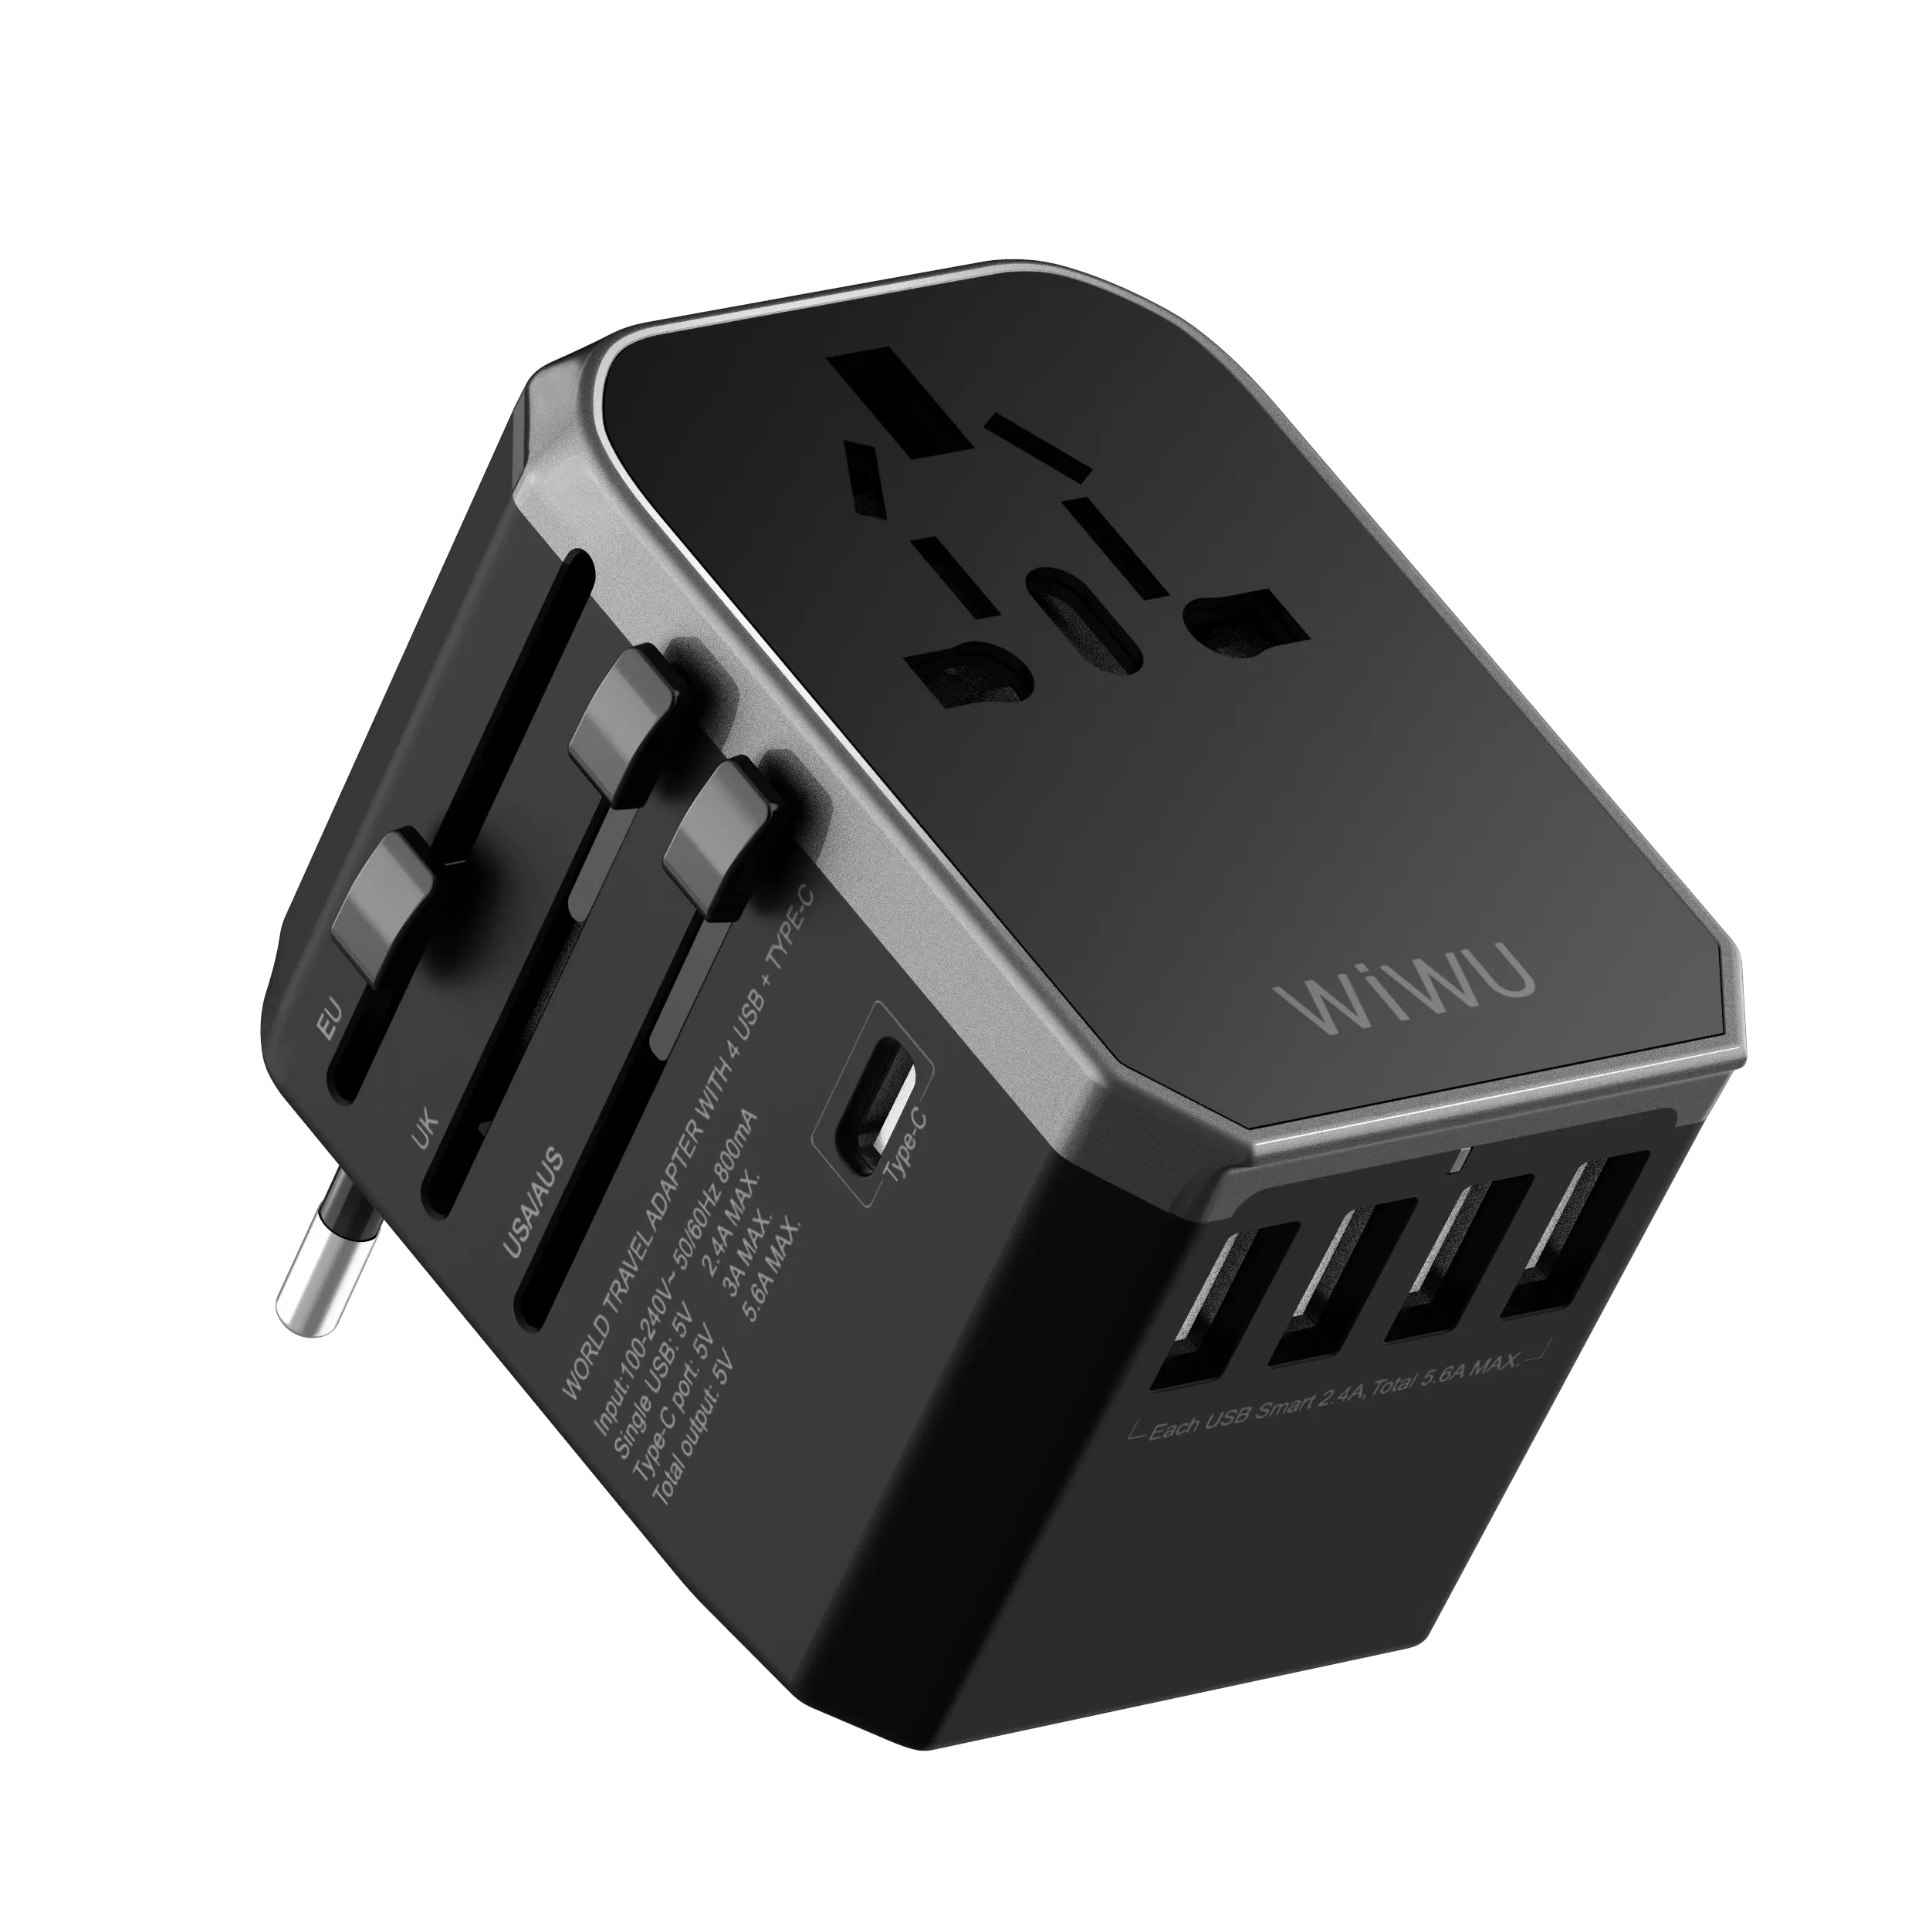 WiWU Double Type-c port Quick Charger Usb 33.5w Pd Charger Wall Power Adaptor Smart Plug Universal Travel Adapter